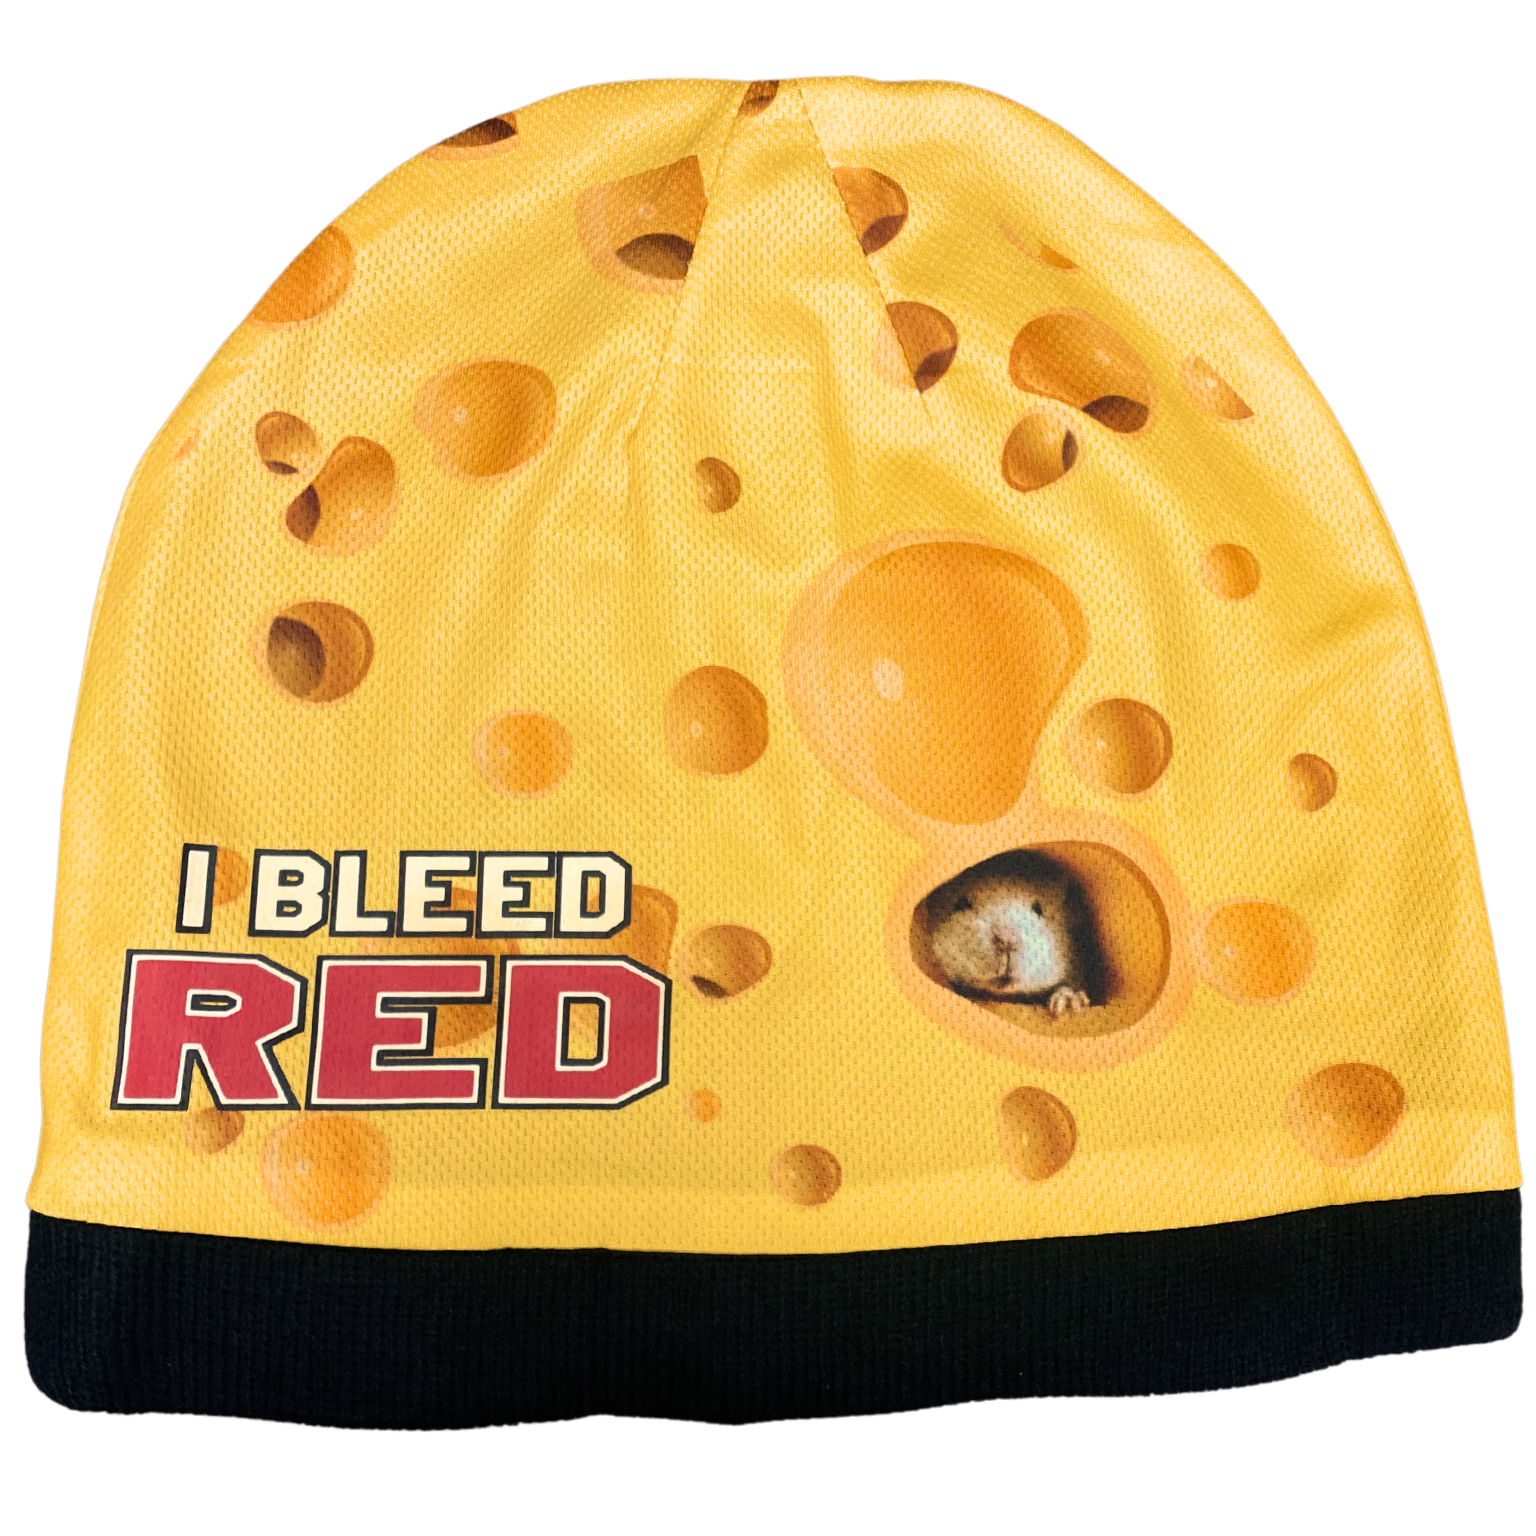 BRIEF INSANITY Wisconsin Cheese Head Adult Beanie - Back